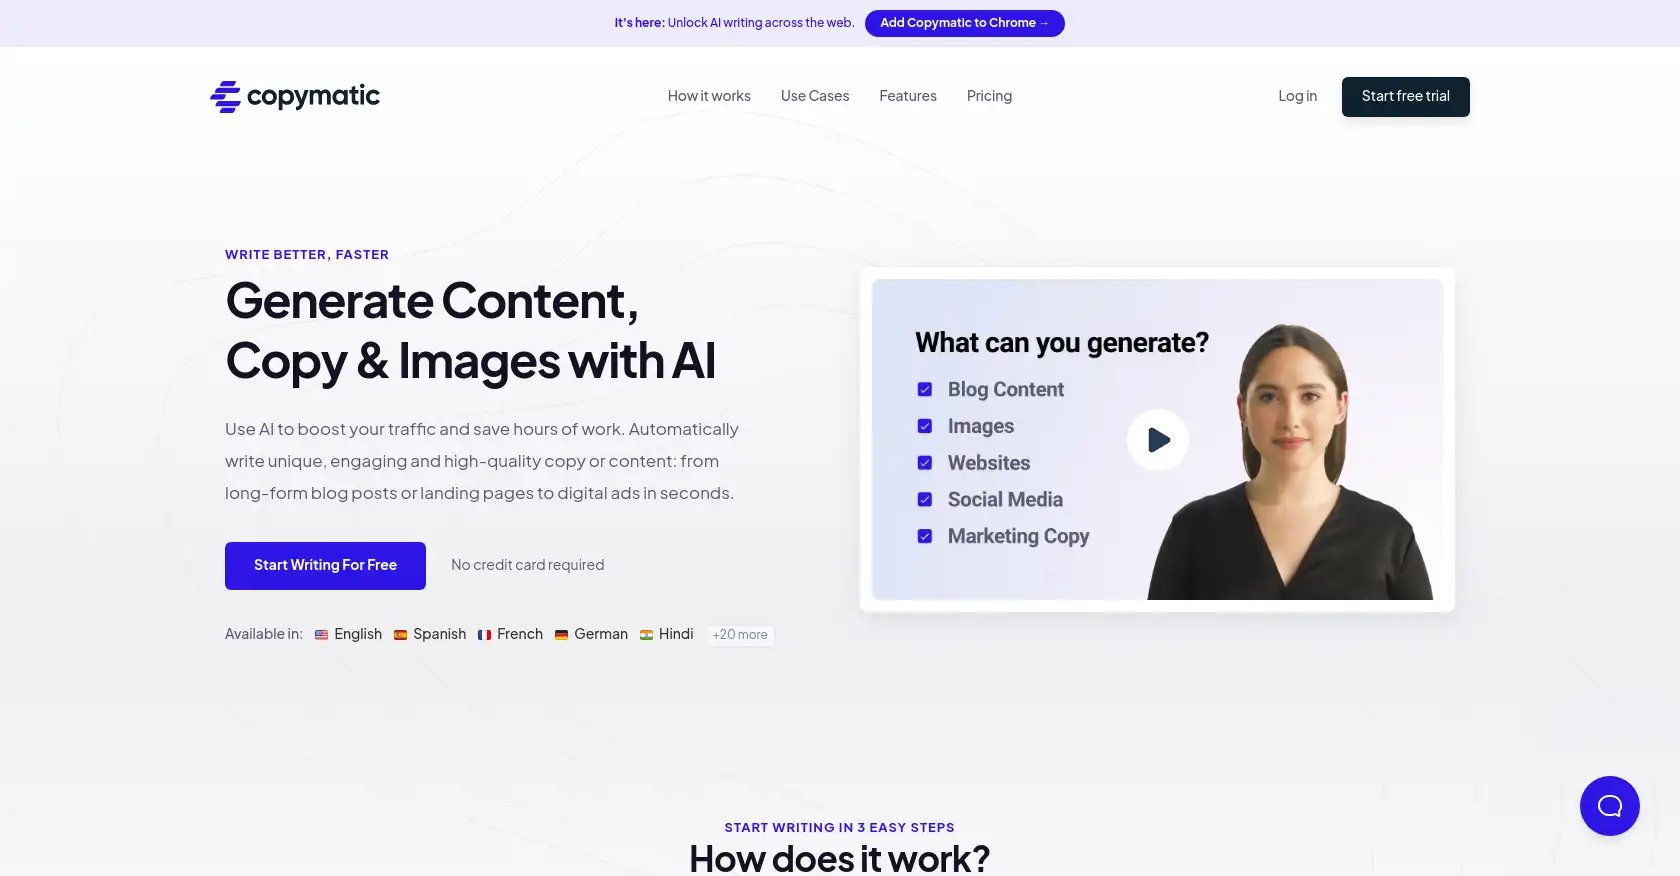 Copymatic - AI tool for Writing assistant, Content Creation, SEO optimization